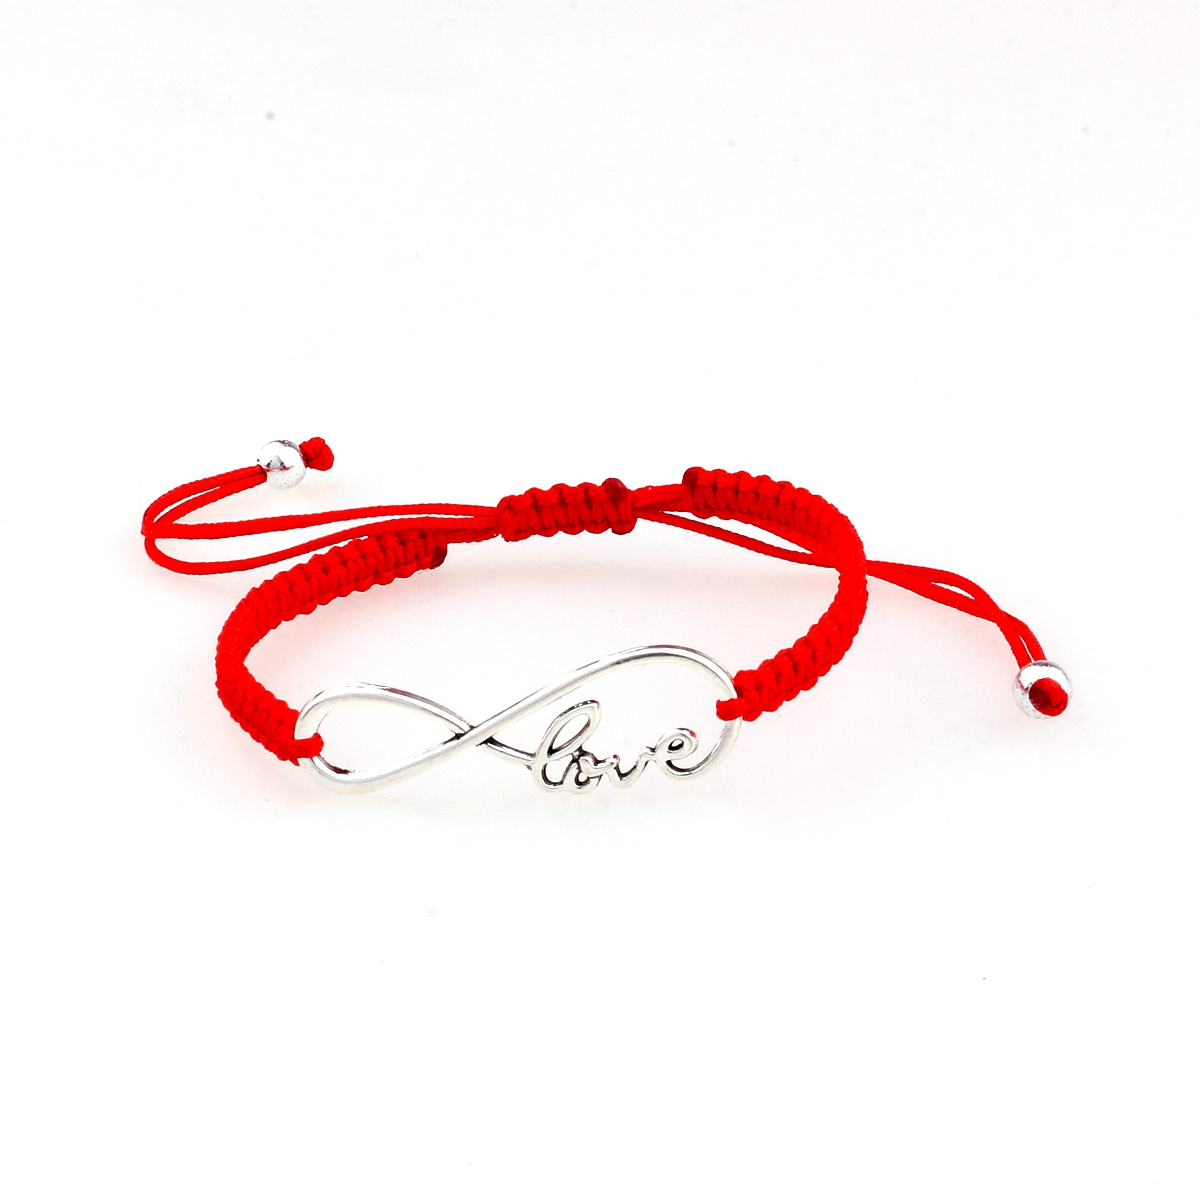 New Leaf Love Braided Bracelet Lucky Red Color Thread Couple Chain Handmade Prayer Bangles Pulsera Jewelry Gift For Friend